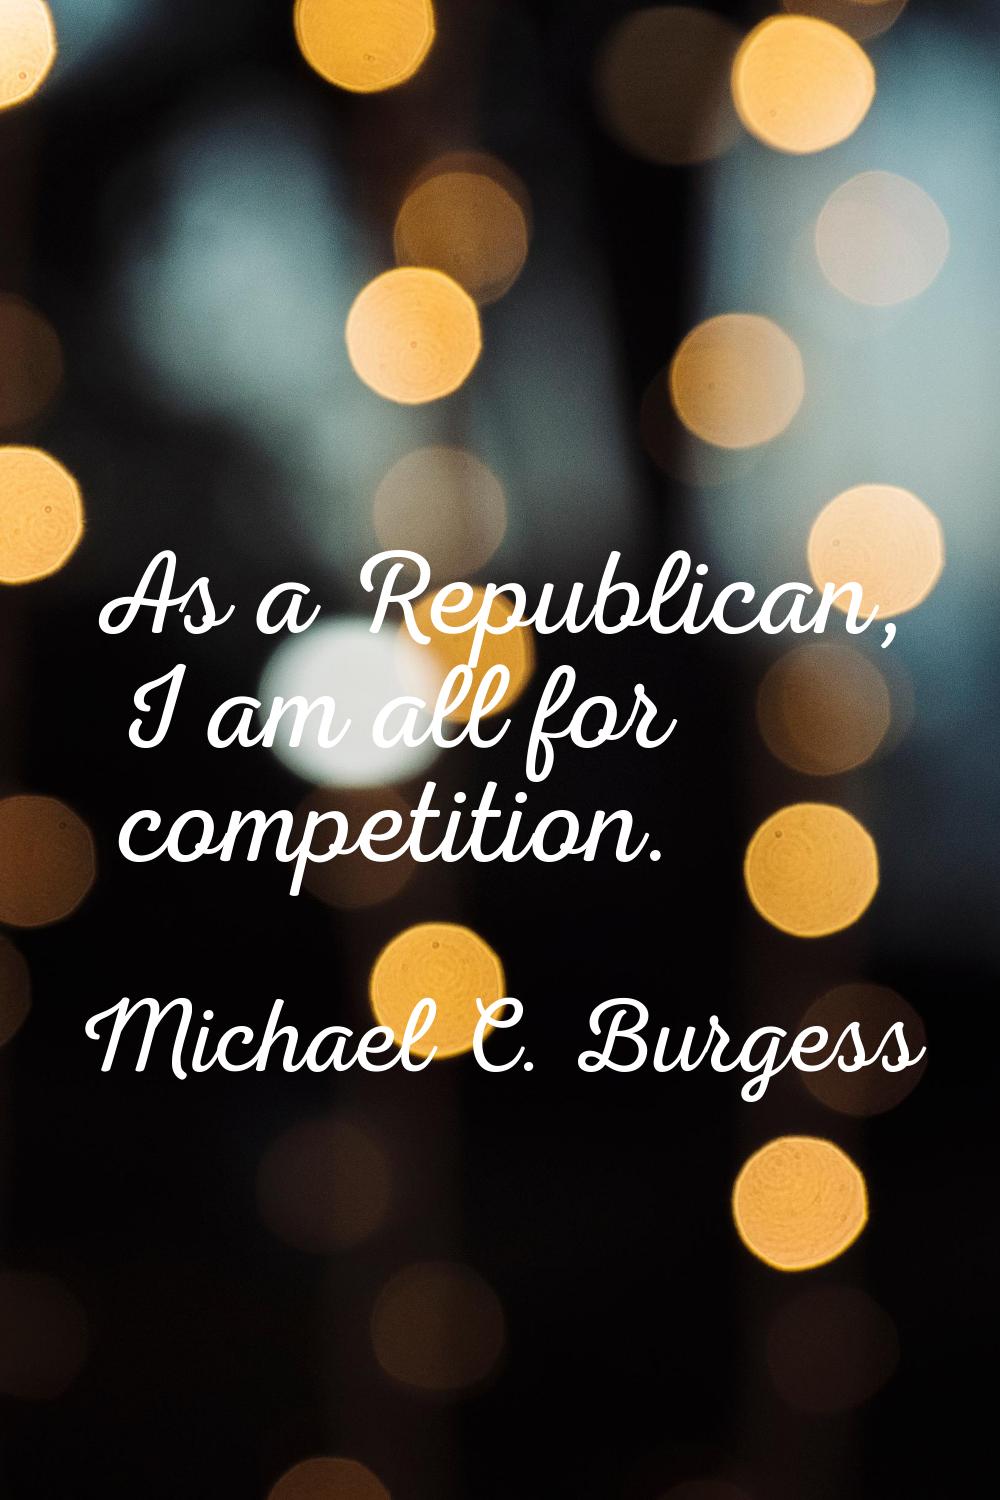 As a Republican, I am all for competition.